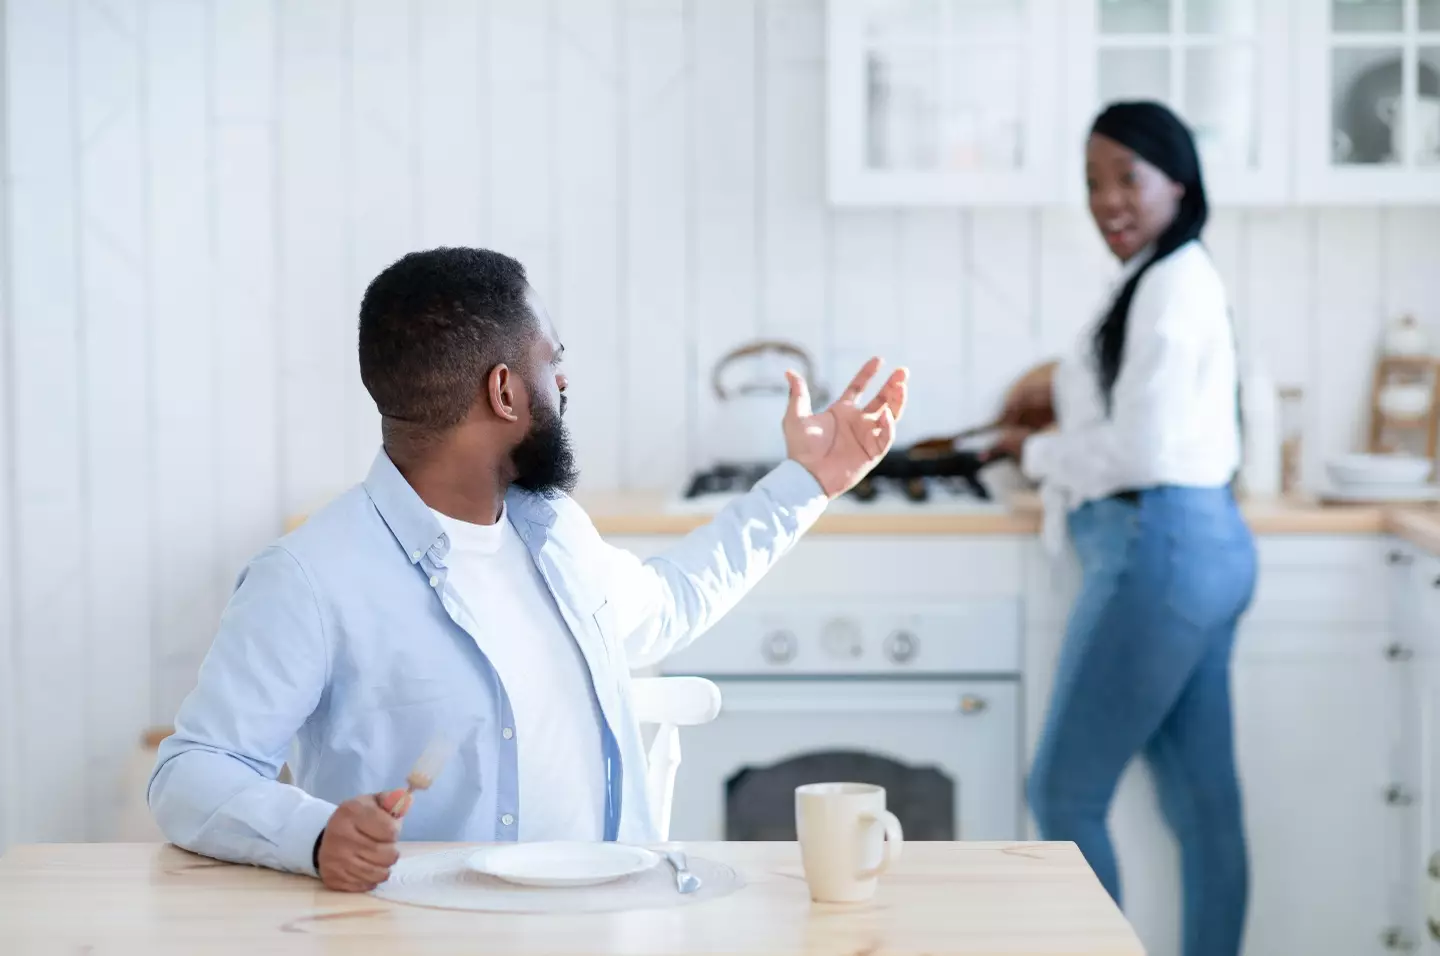 A woman stood her ground when her boyfriend requested she cook an extra meal for his friend (stock image).